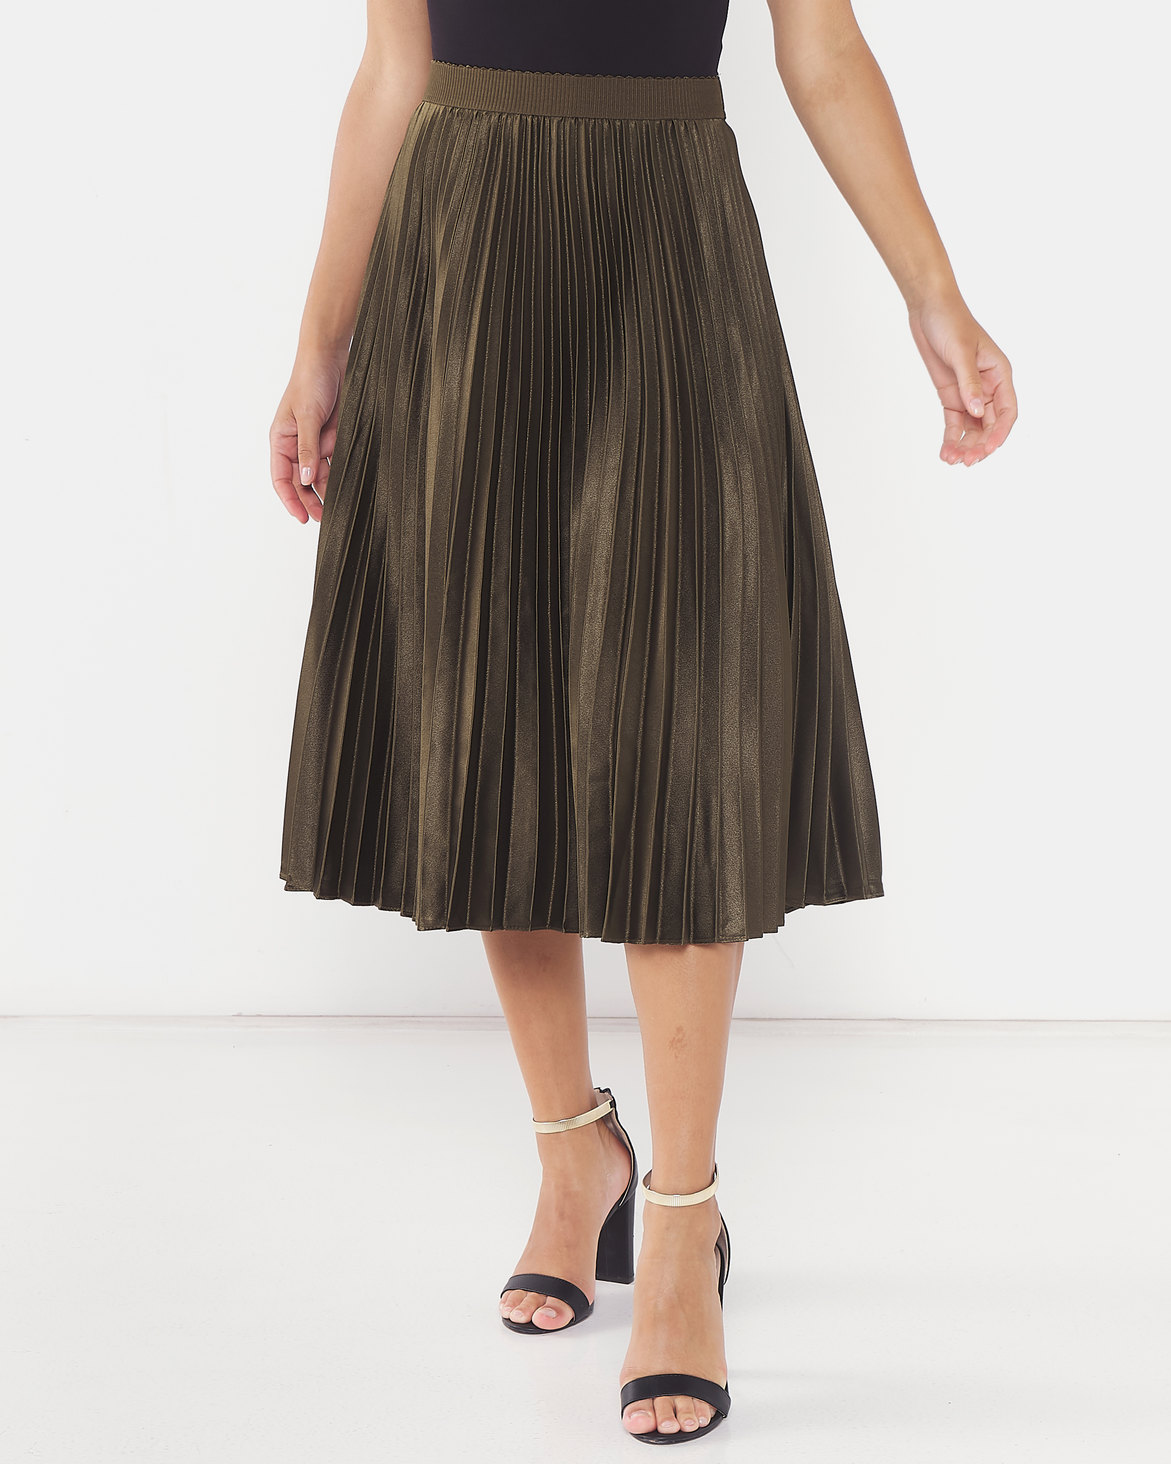 Miss Cassidy By Queenspark Pleated Satin Woven Skirt Fatigue | Zando